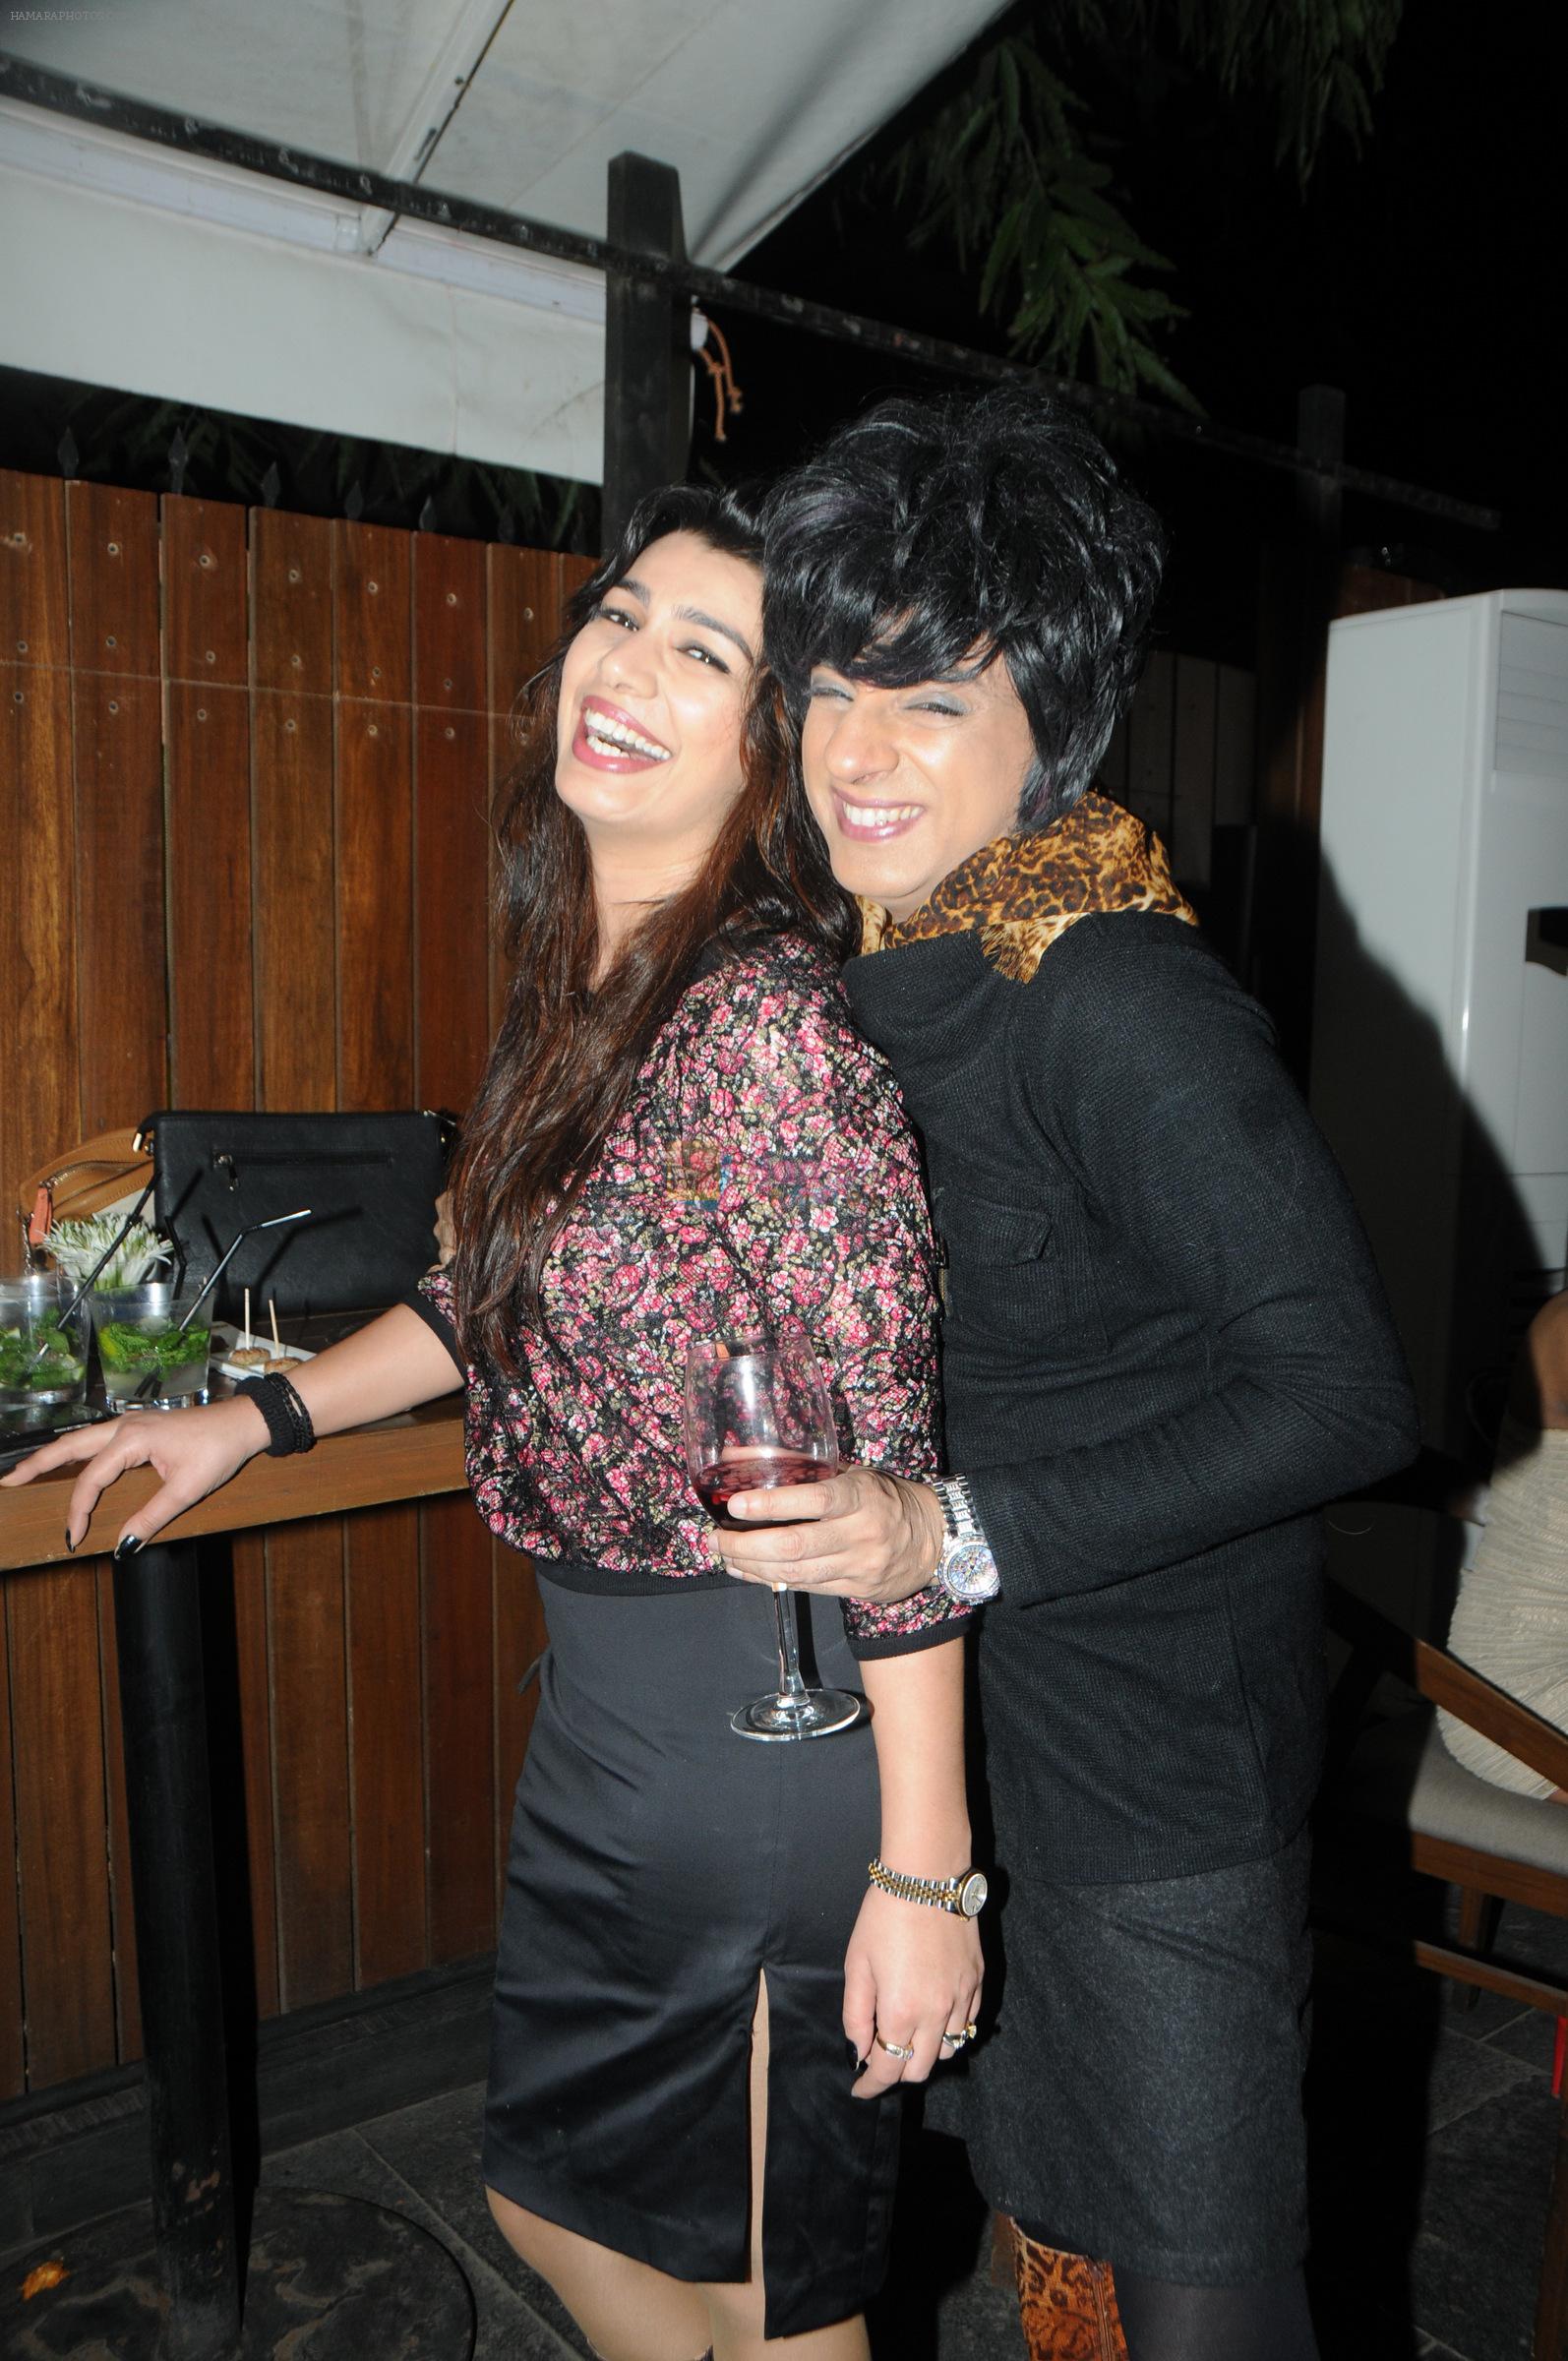 Mink Brar, with Rohhit Verma at Rohhit Verma hosts a surprise party for Prem Sharma in Mumbai on 5th Jan 2014